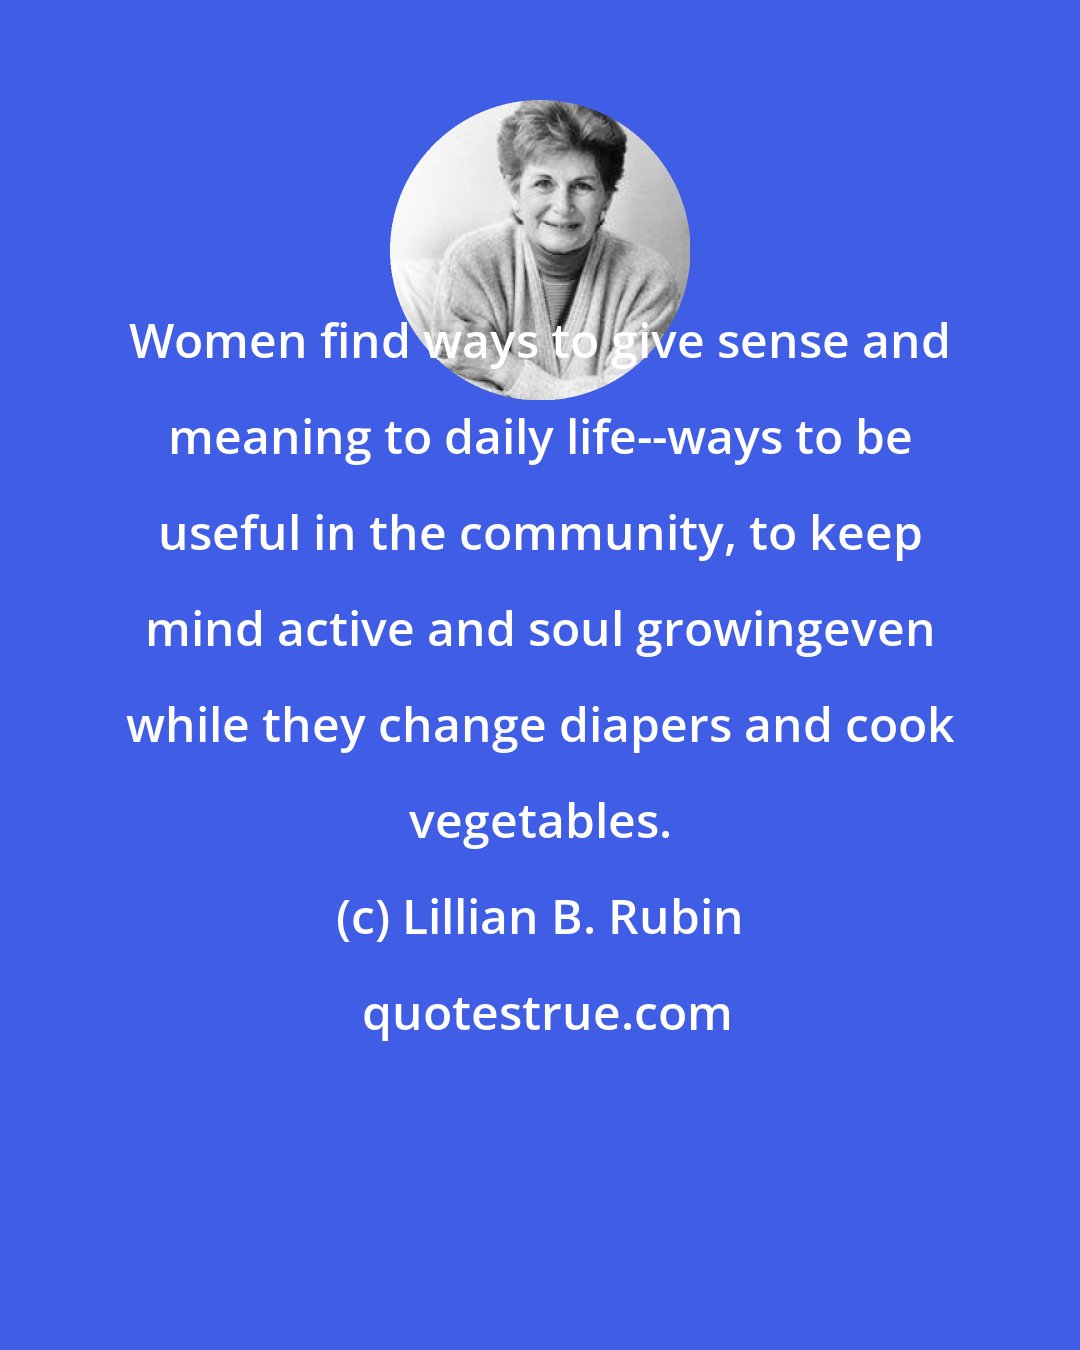 Lillian B. Rubin: Women find ways to give sense and meaning to daily life--ways to be useful in the community, to keep mind active and soul growingeven while they change diapers and cook vegetables.